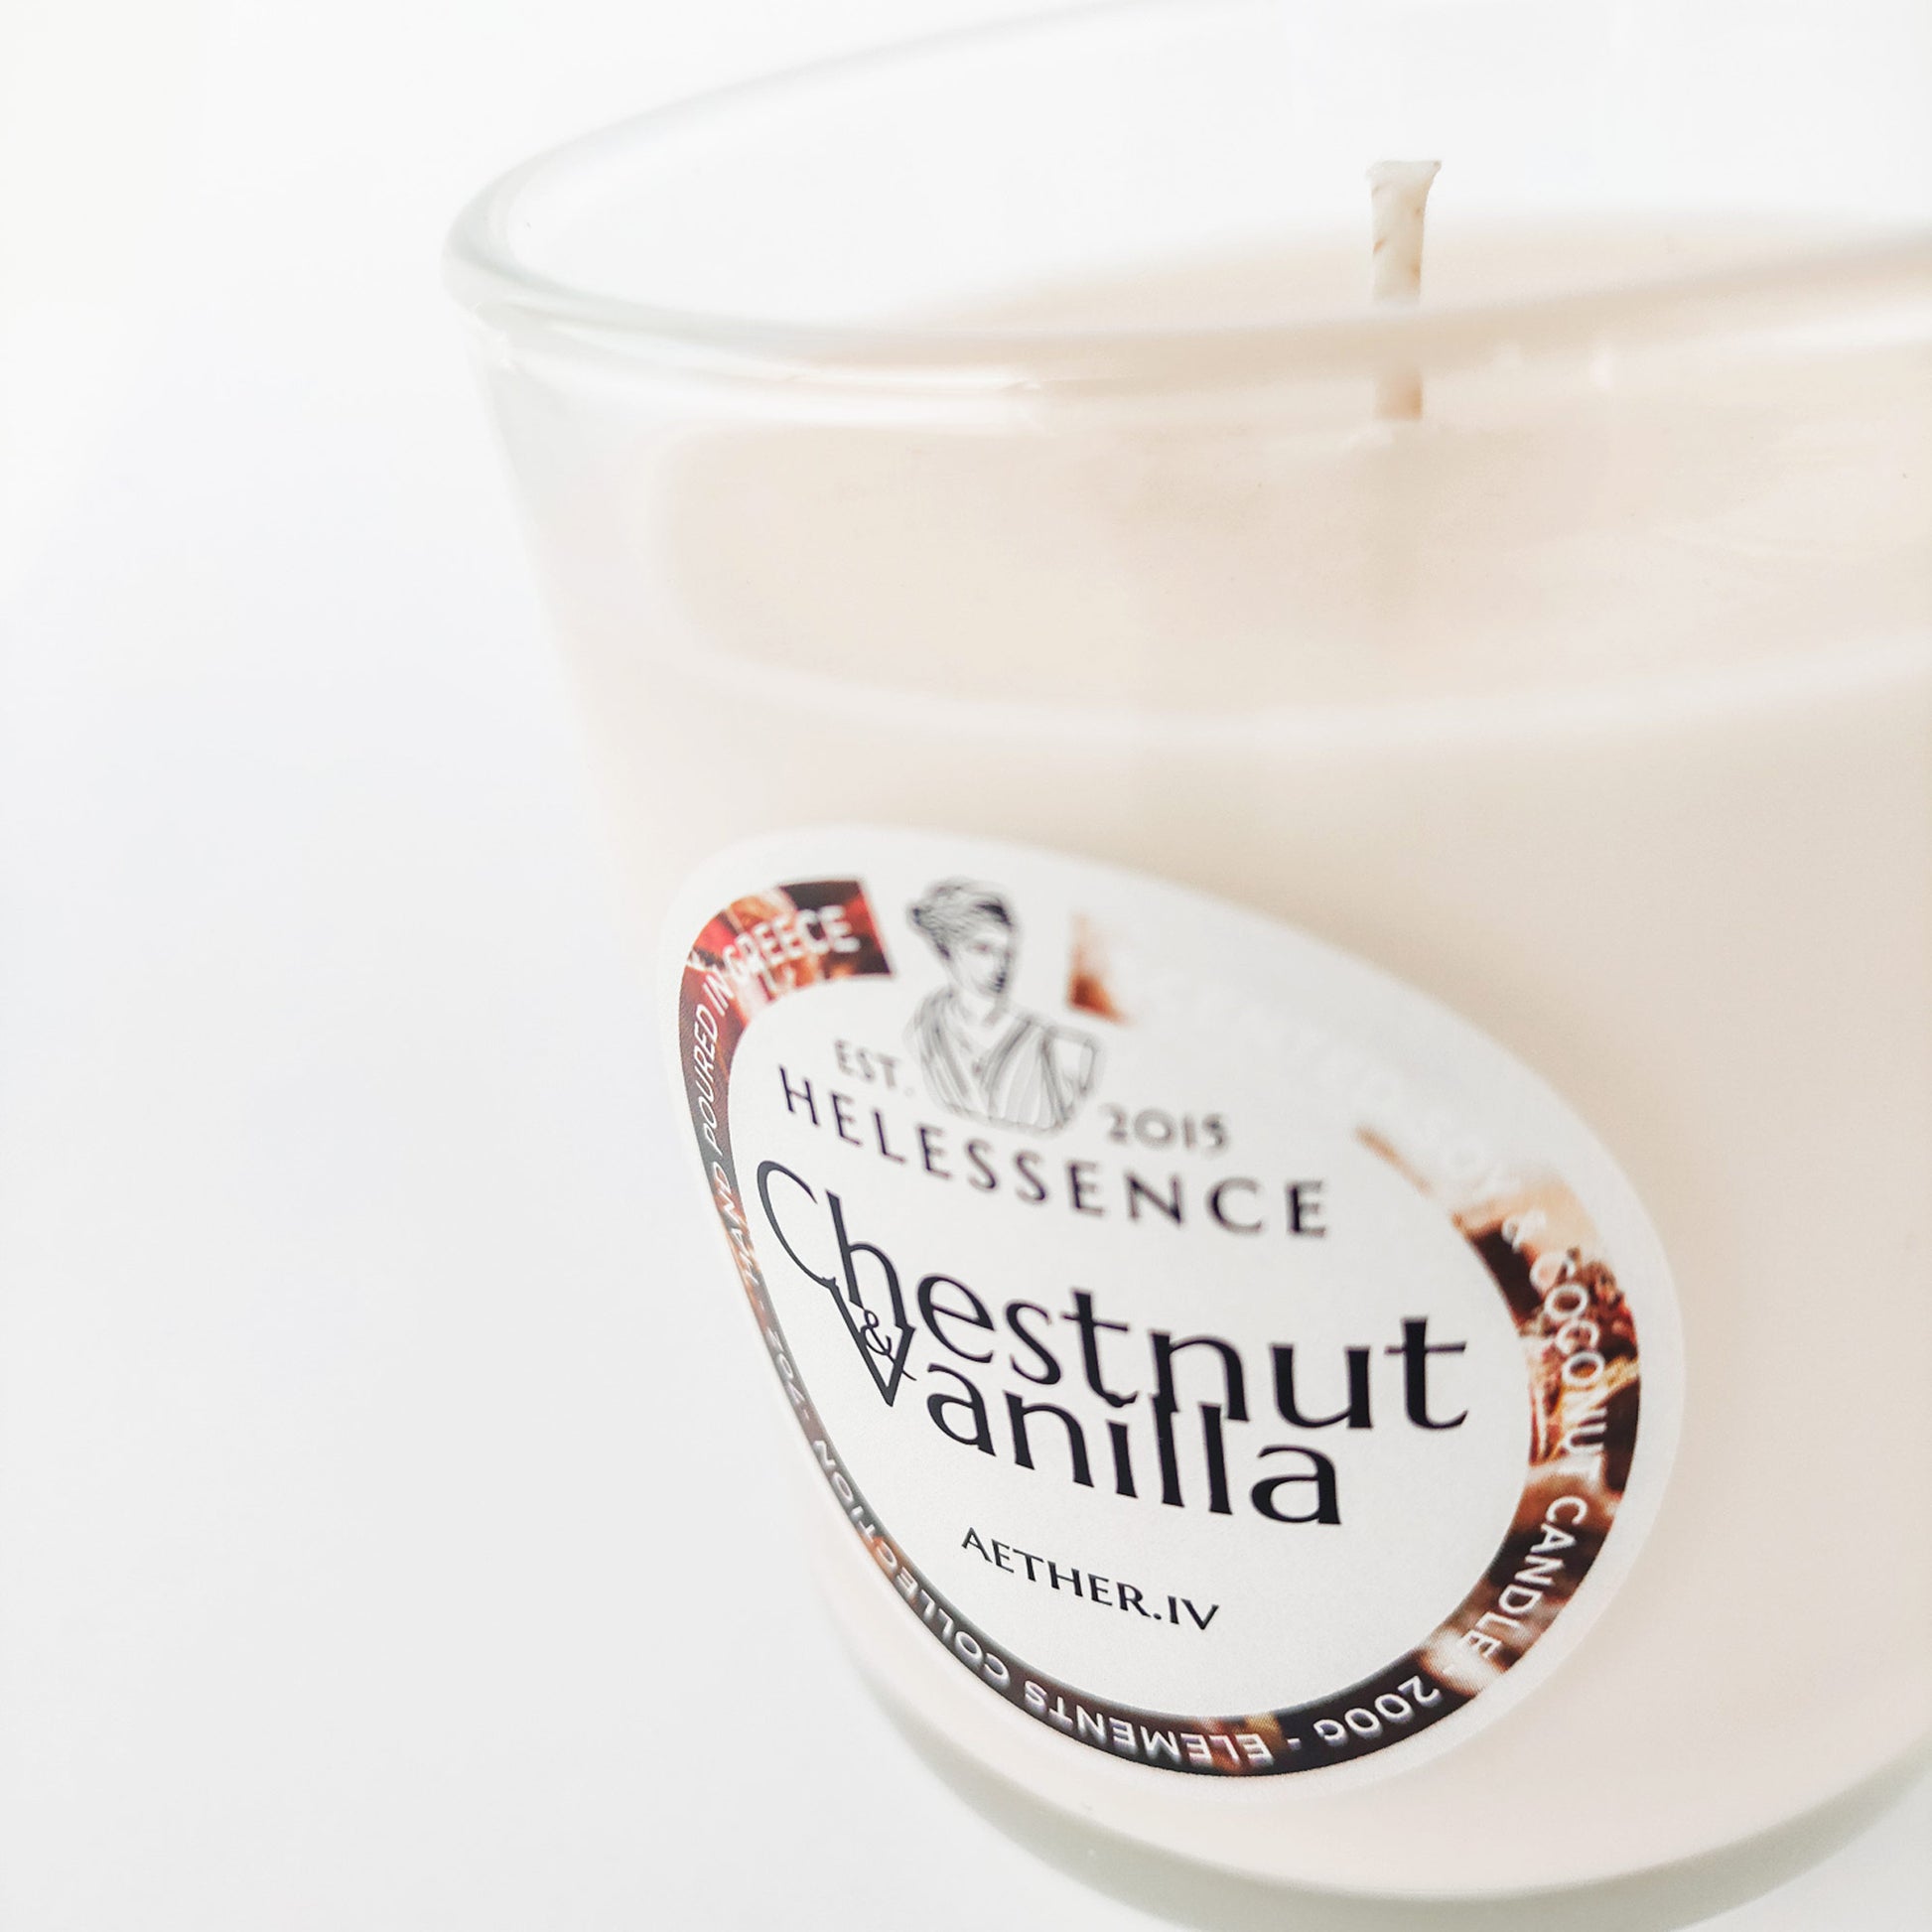 Chestnut & Vanilla Scented Candle